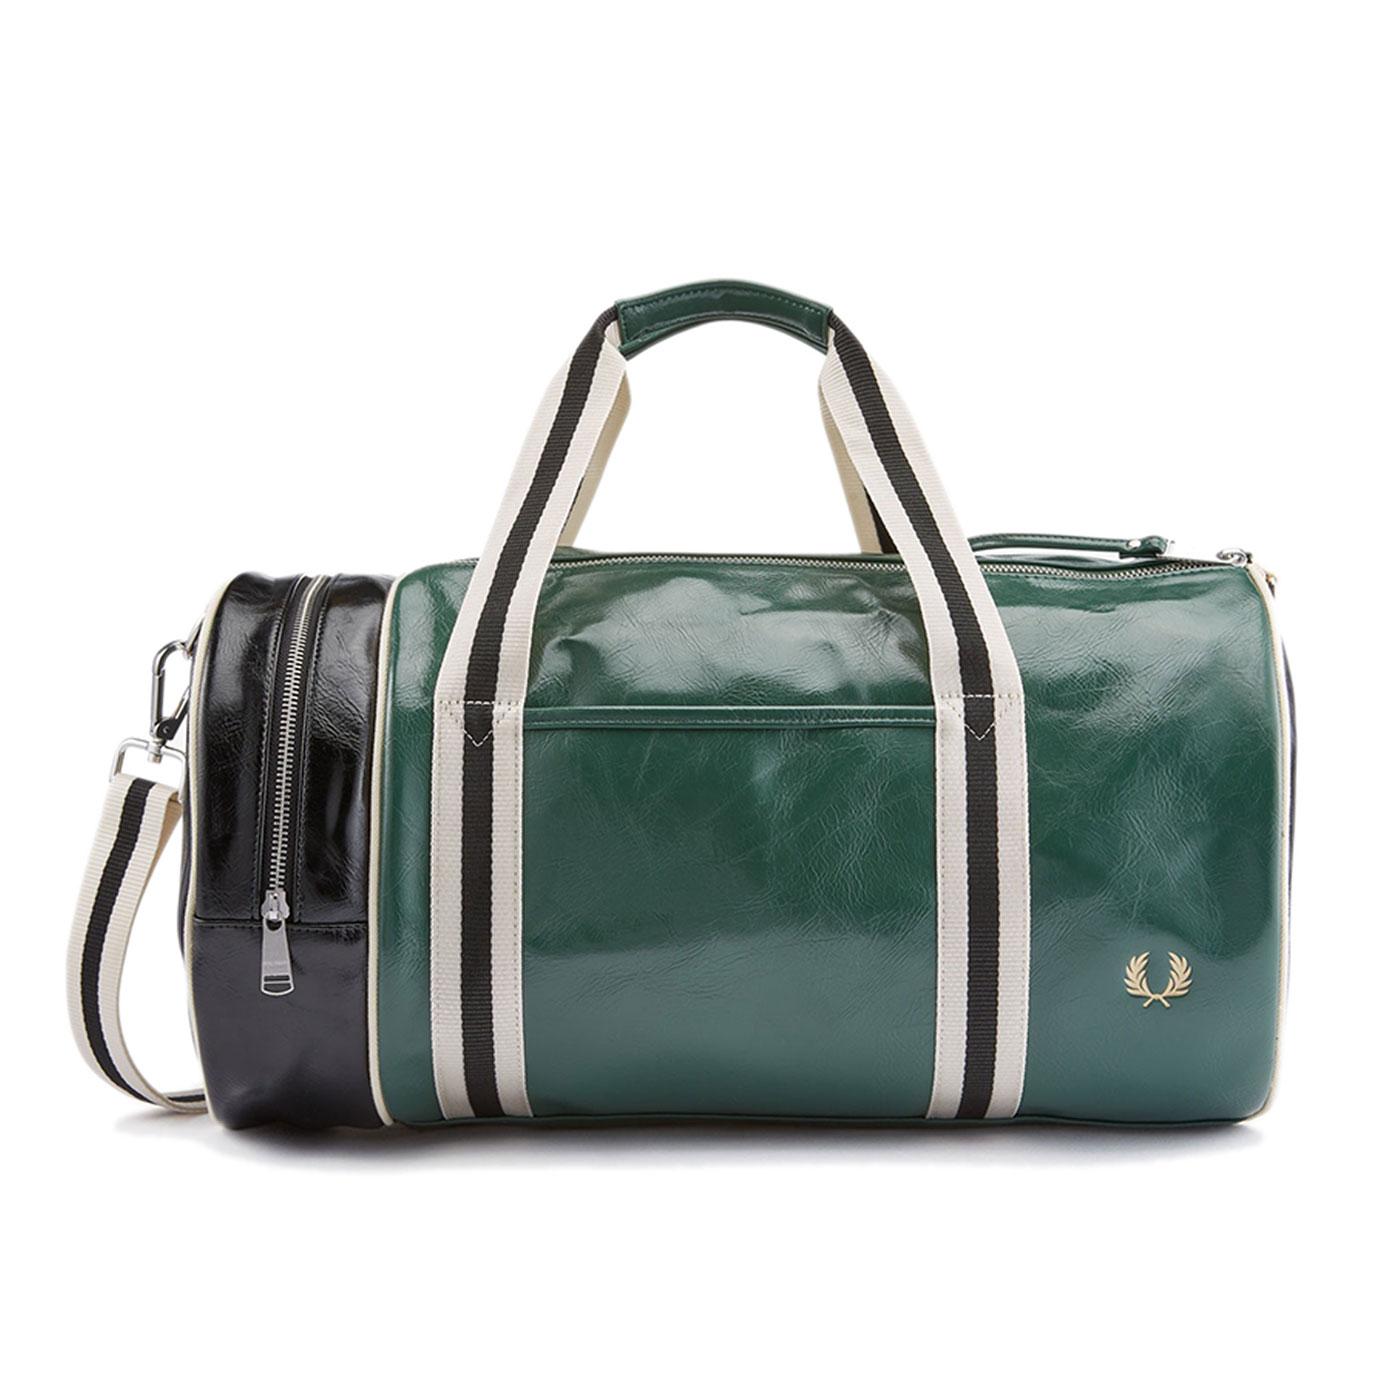 FRED PERRY Colour Block Classic Barrel Bag in Green/Black